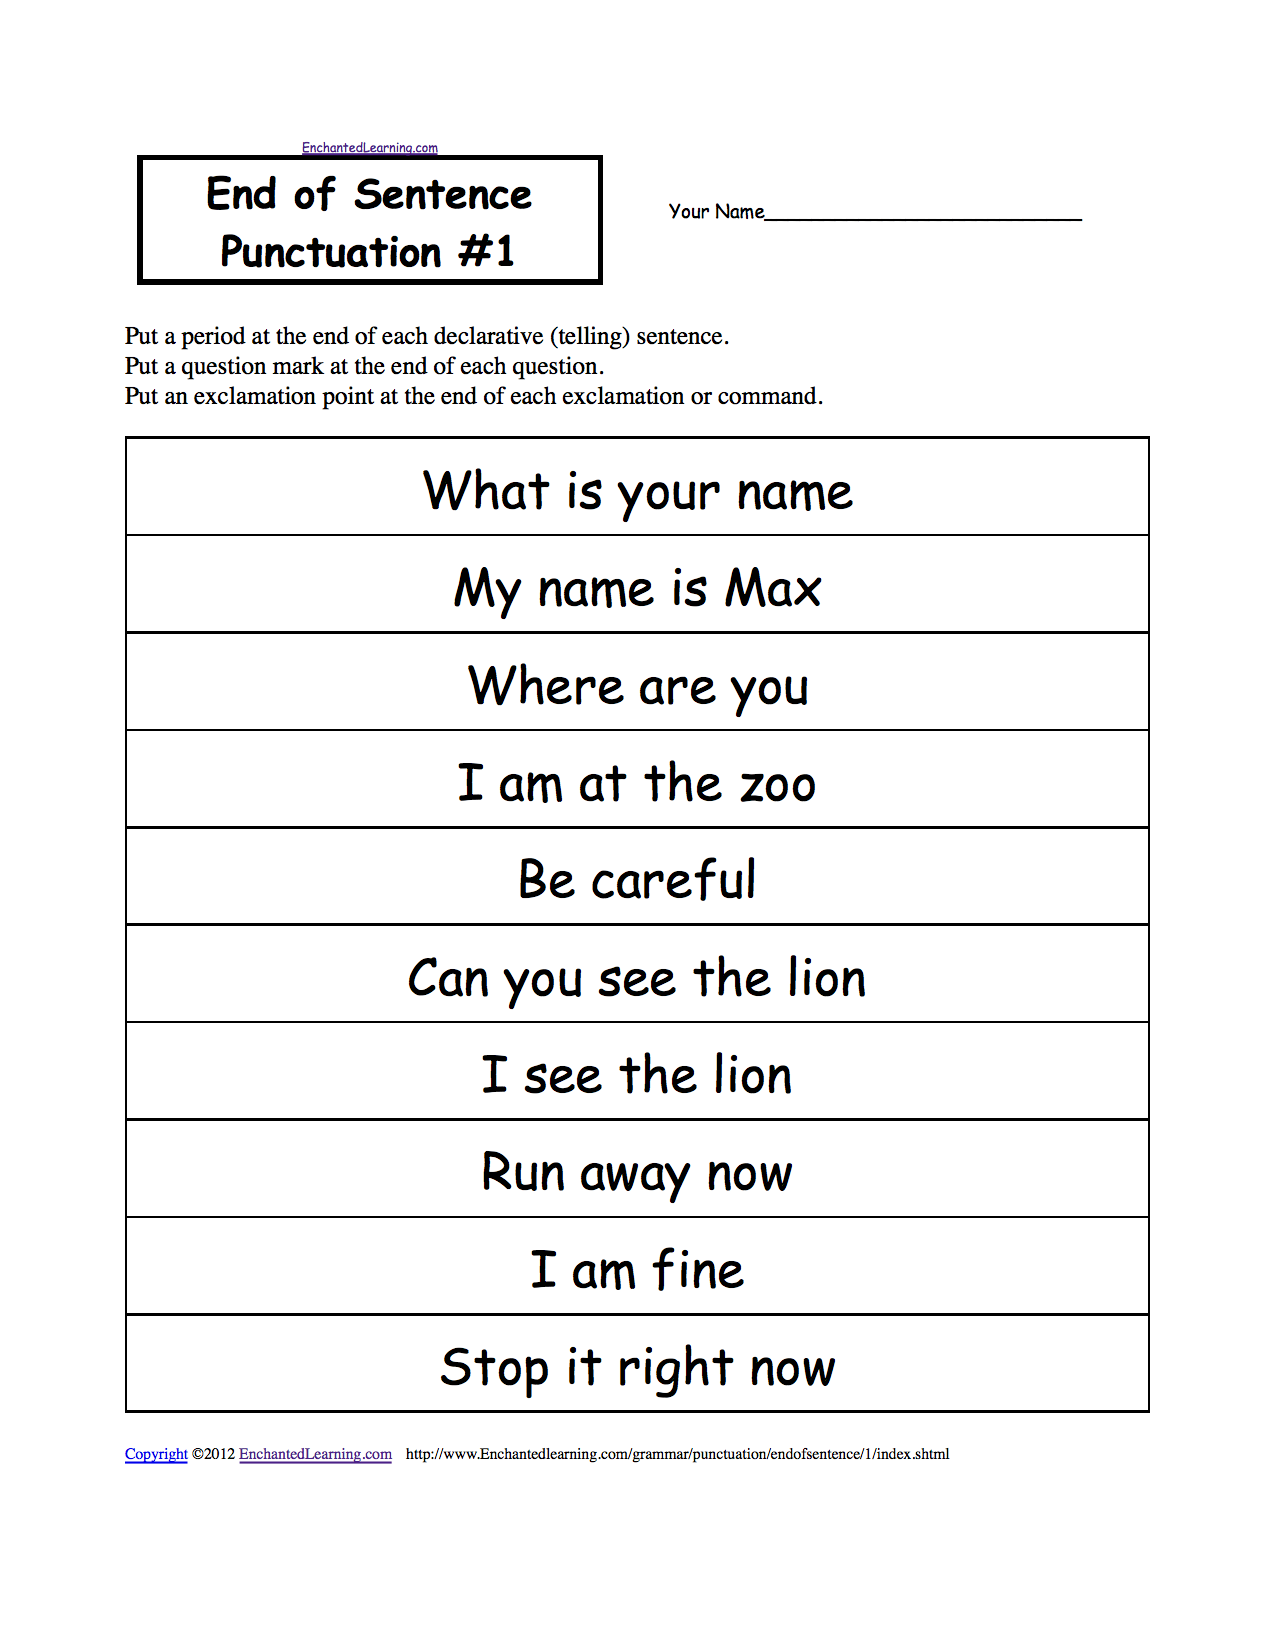 capitalization-and-punctuation-worksheet-pdfcapitalization-and-punctuation-worksheet-pdf